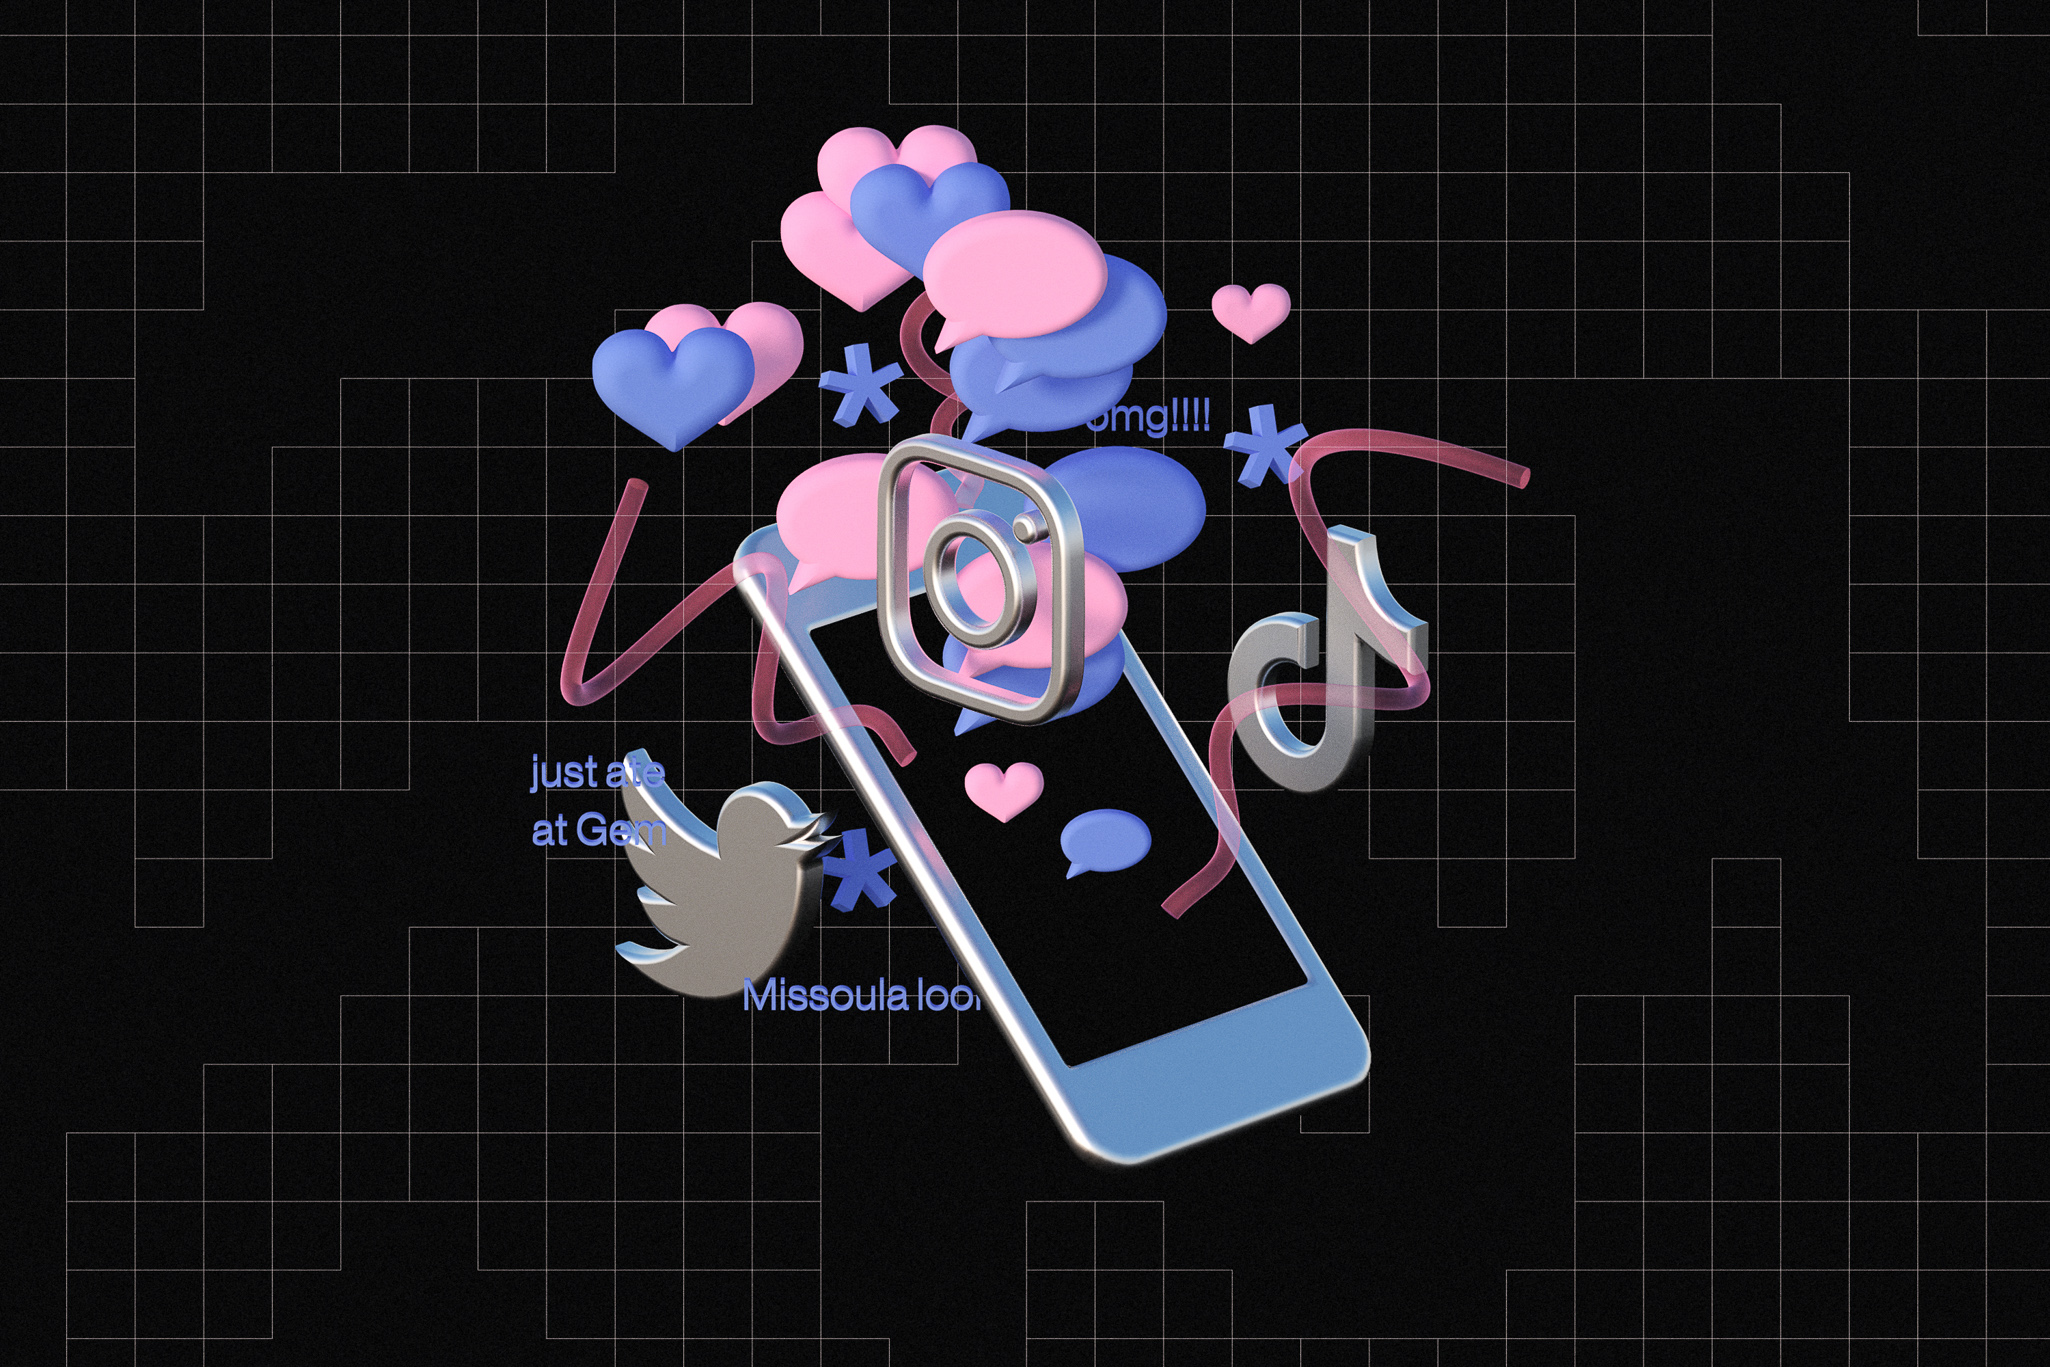 An illustration of a phone with the TikTok logo, the Instagram logo, and heart and speech bubble icons floating out of it.